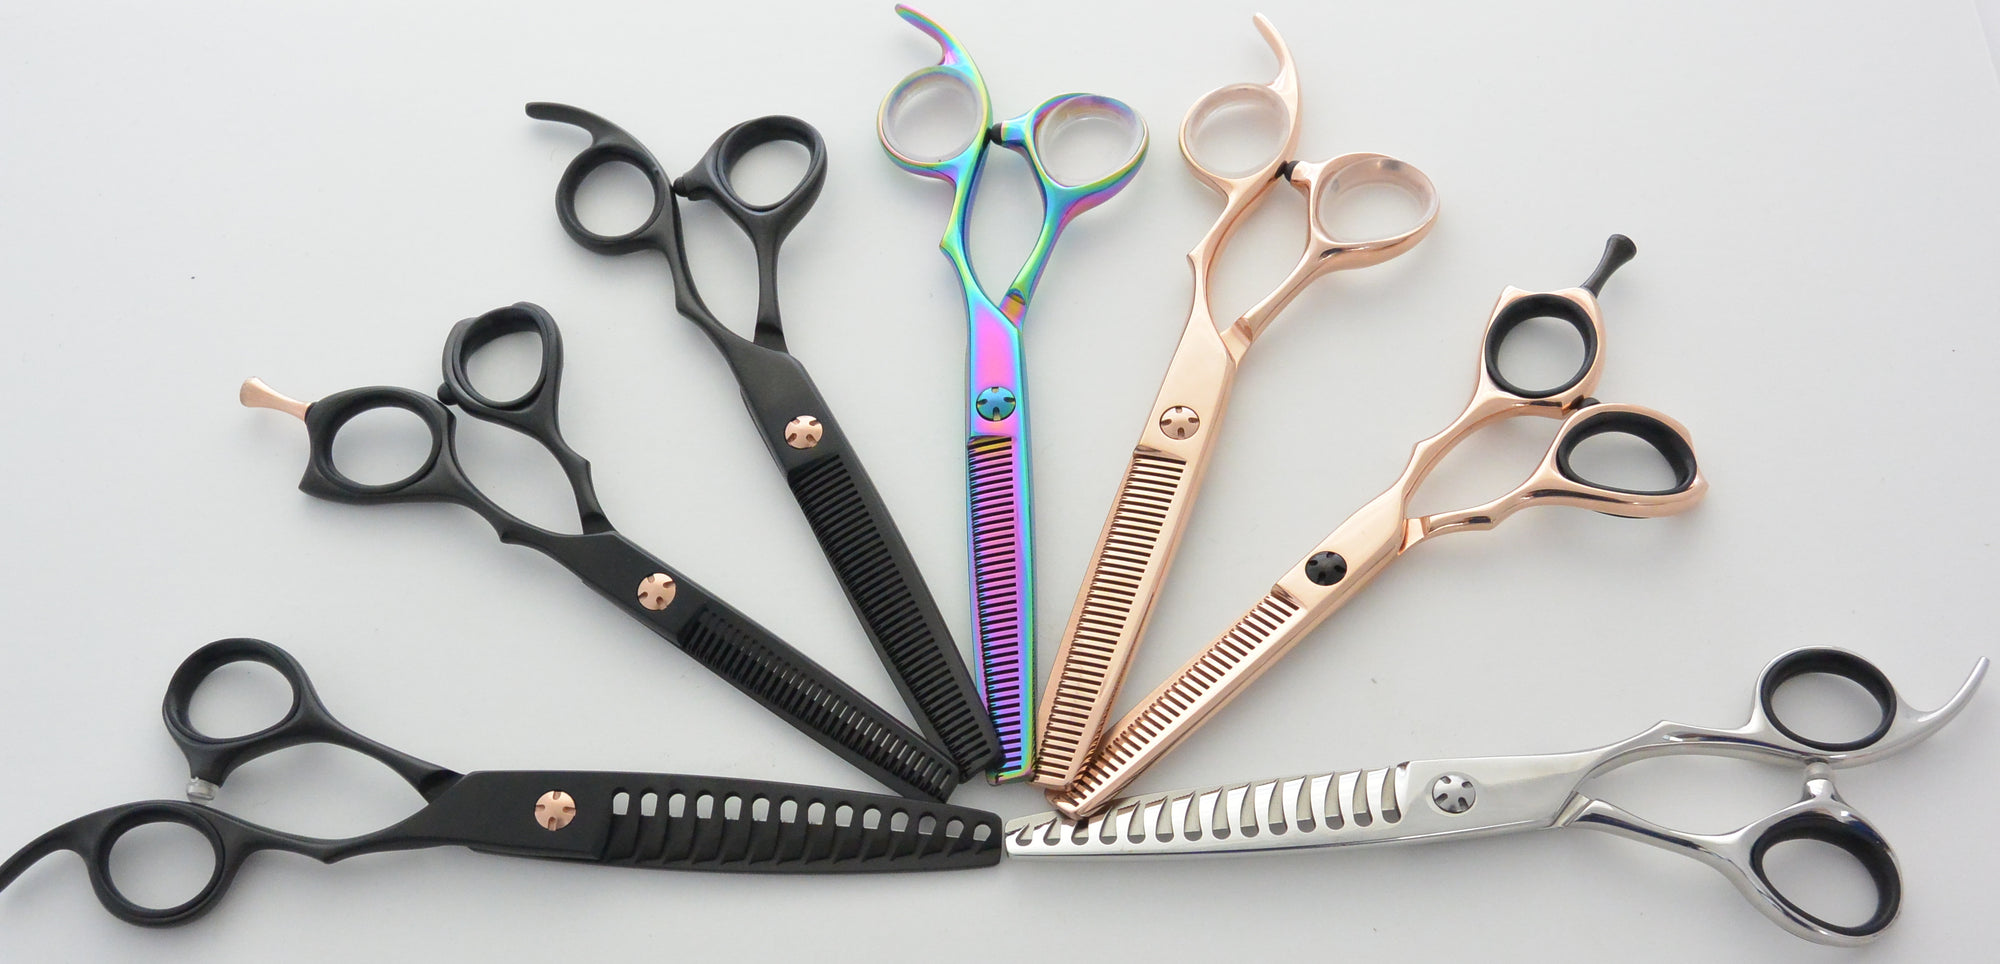 How to texturize hair with scissors